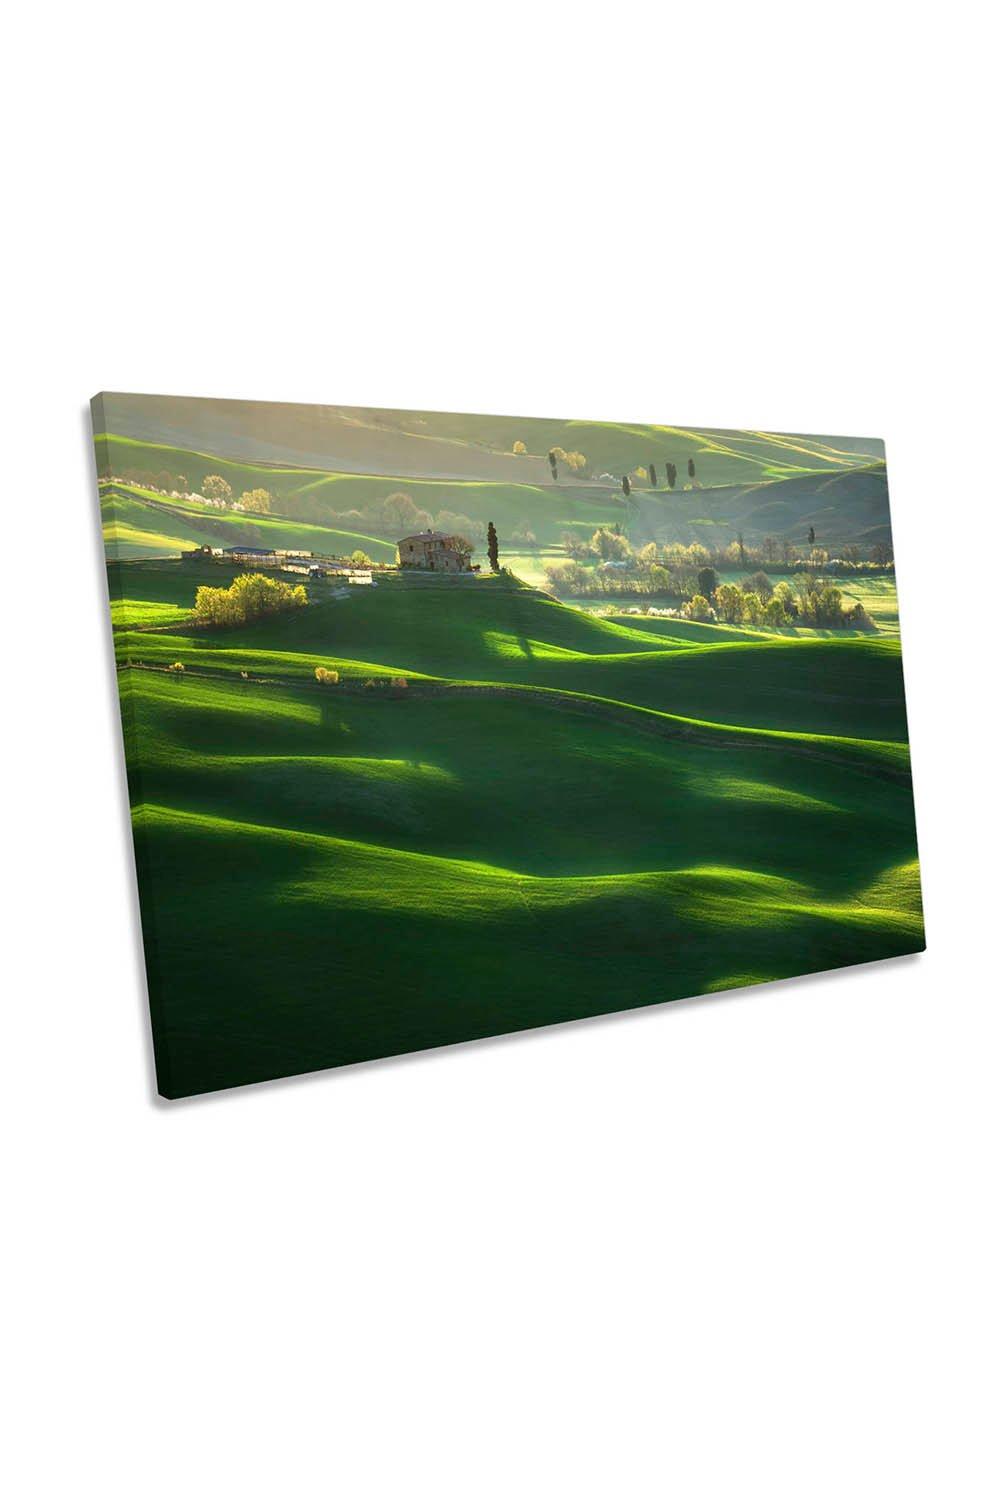 Green Landscape Waves Tuscany Canvas Wall Art Picture Print